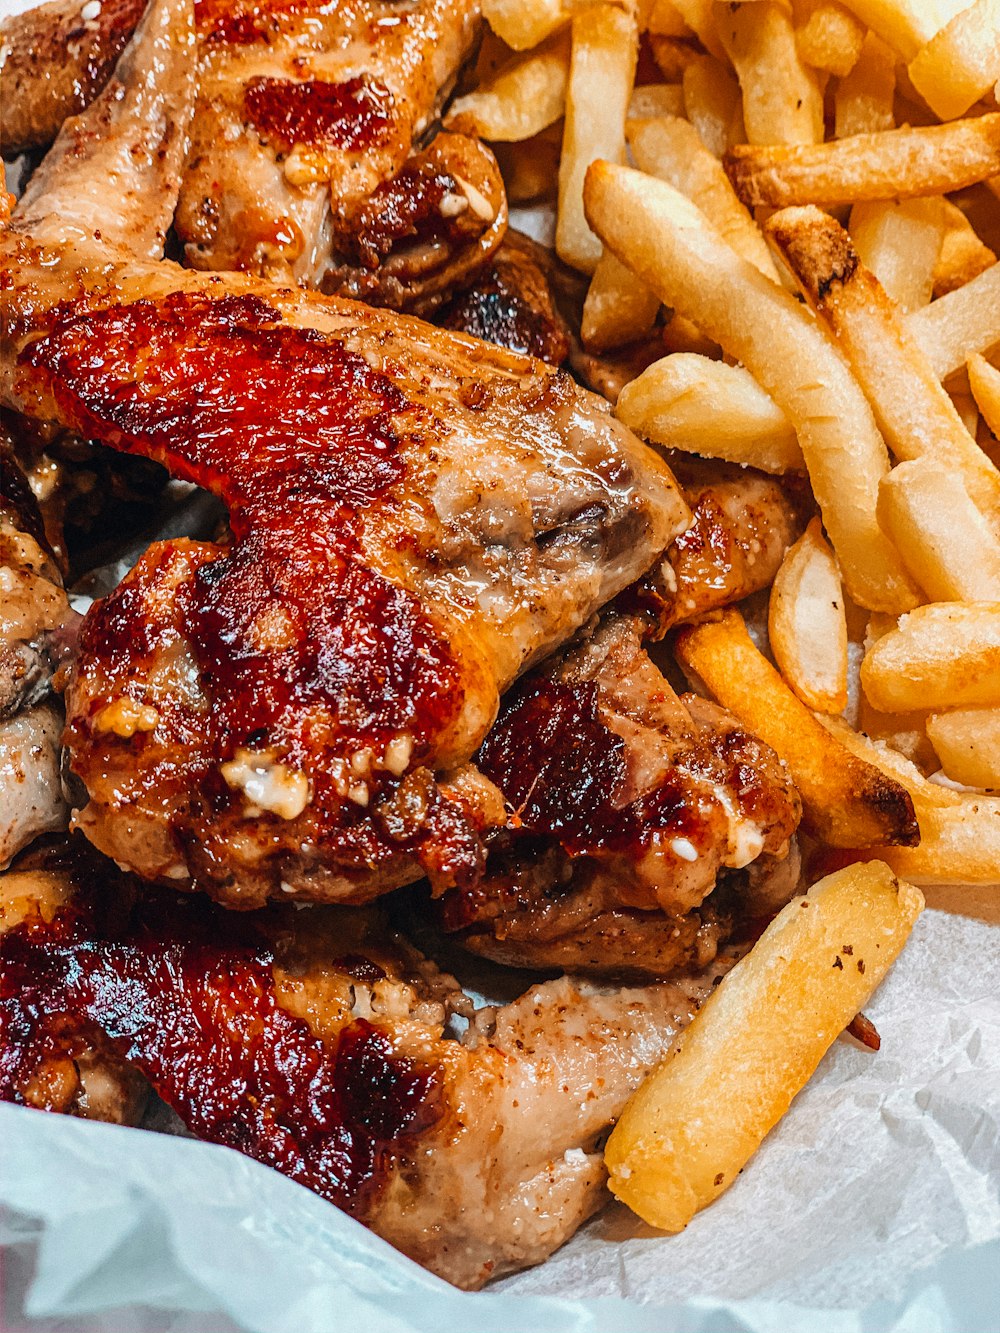 potato fries and chicken wings